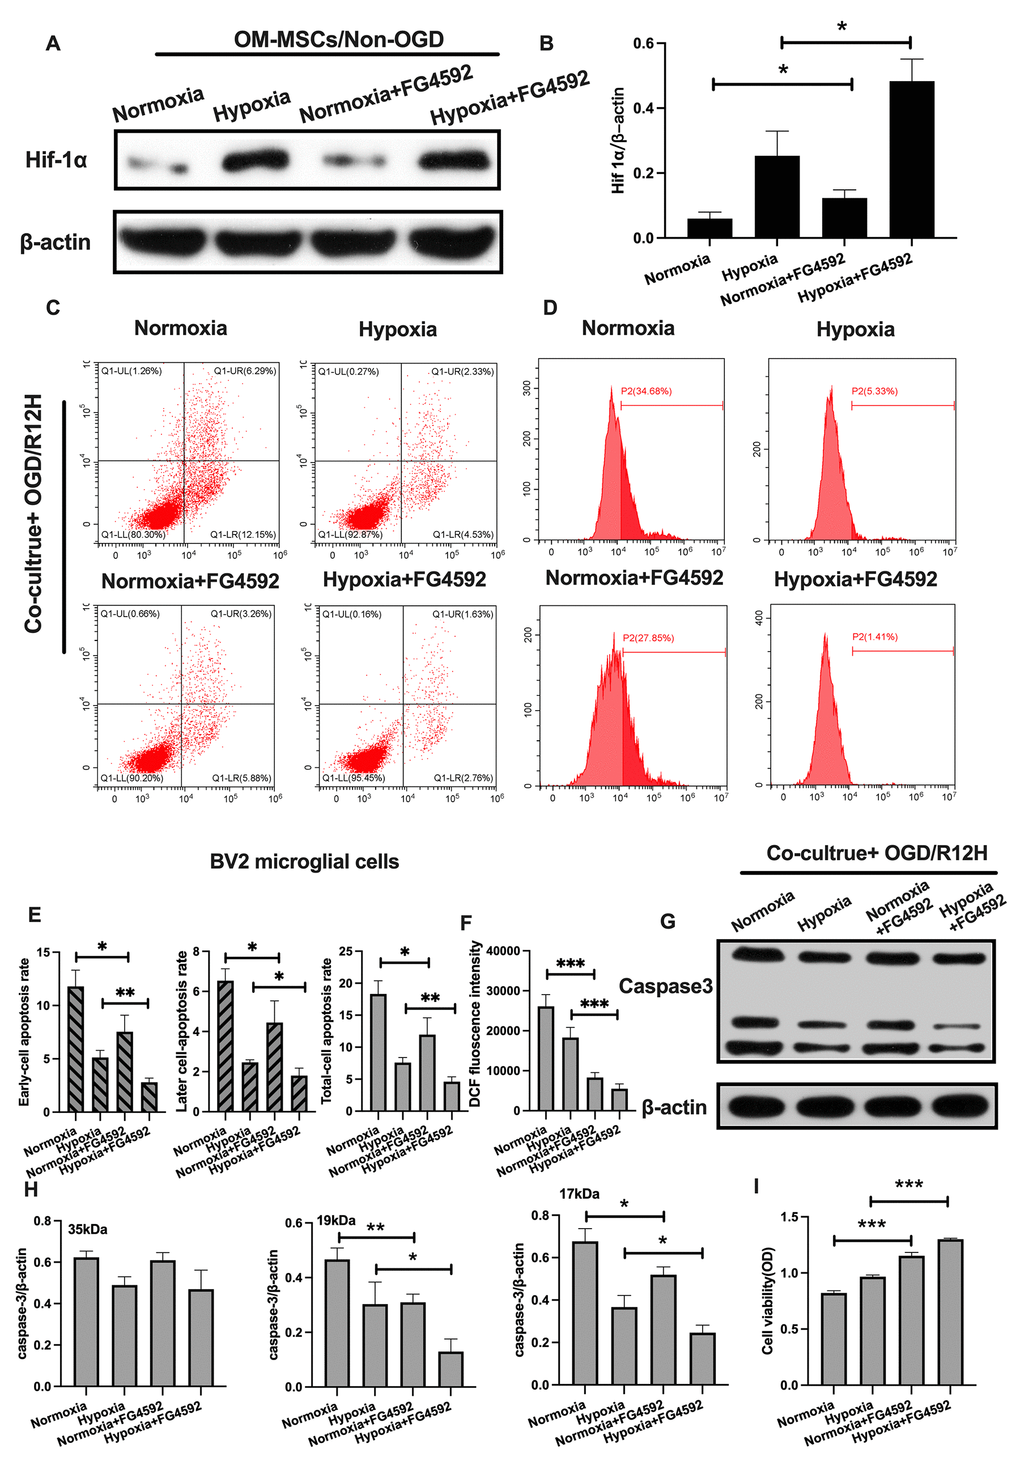 Induction of HIF-1α in OM-MSCs with FG-4592 inhibited cerebral OGD/R-induced apoptosis in BV2 microglial cells. (A, B) The successful overexpression of HIF-1α in OM-MSCs was confirmed by Western blotting. (C, E) The apoptosis rate among BV2 microglial cells was determined with flow cytometry and Annexin V/PI staining in each group. (D, F) Production of ROS levels in BV2 microglial cells was measured with flow cytometry. (G, H) Protein expression of caspase3 in BV2 microglial cells was quantified by Western blotting. (I) The viability of BV2 microglial cells was evaluated with MTT assays. All data are presented as the mean ±SD. *p